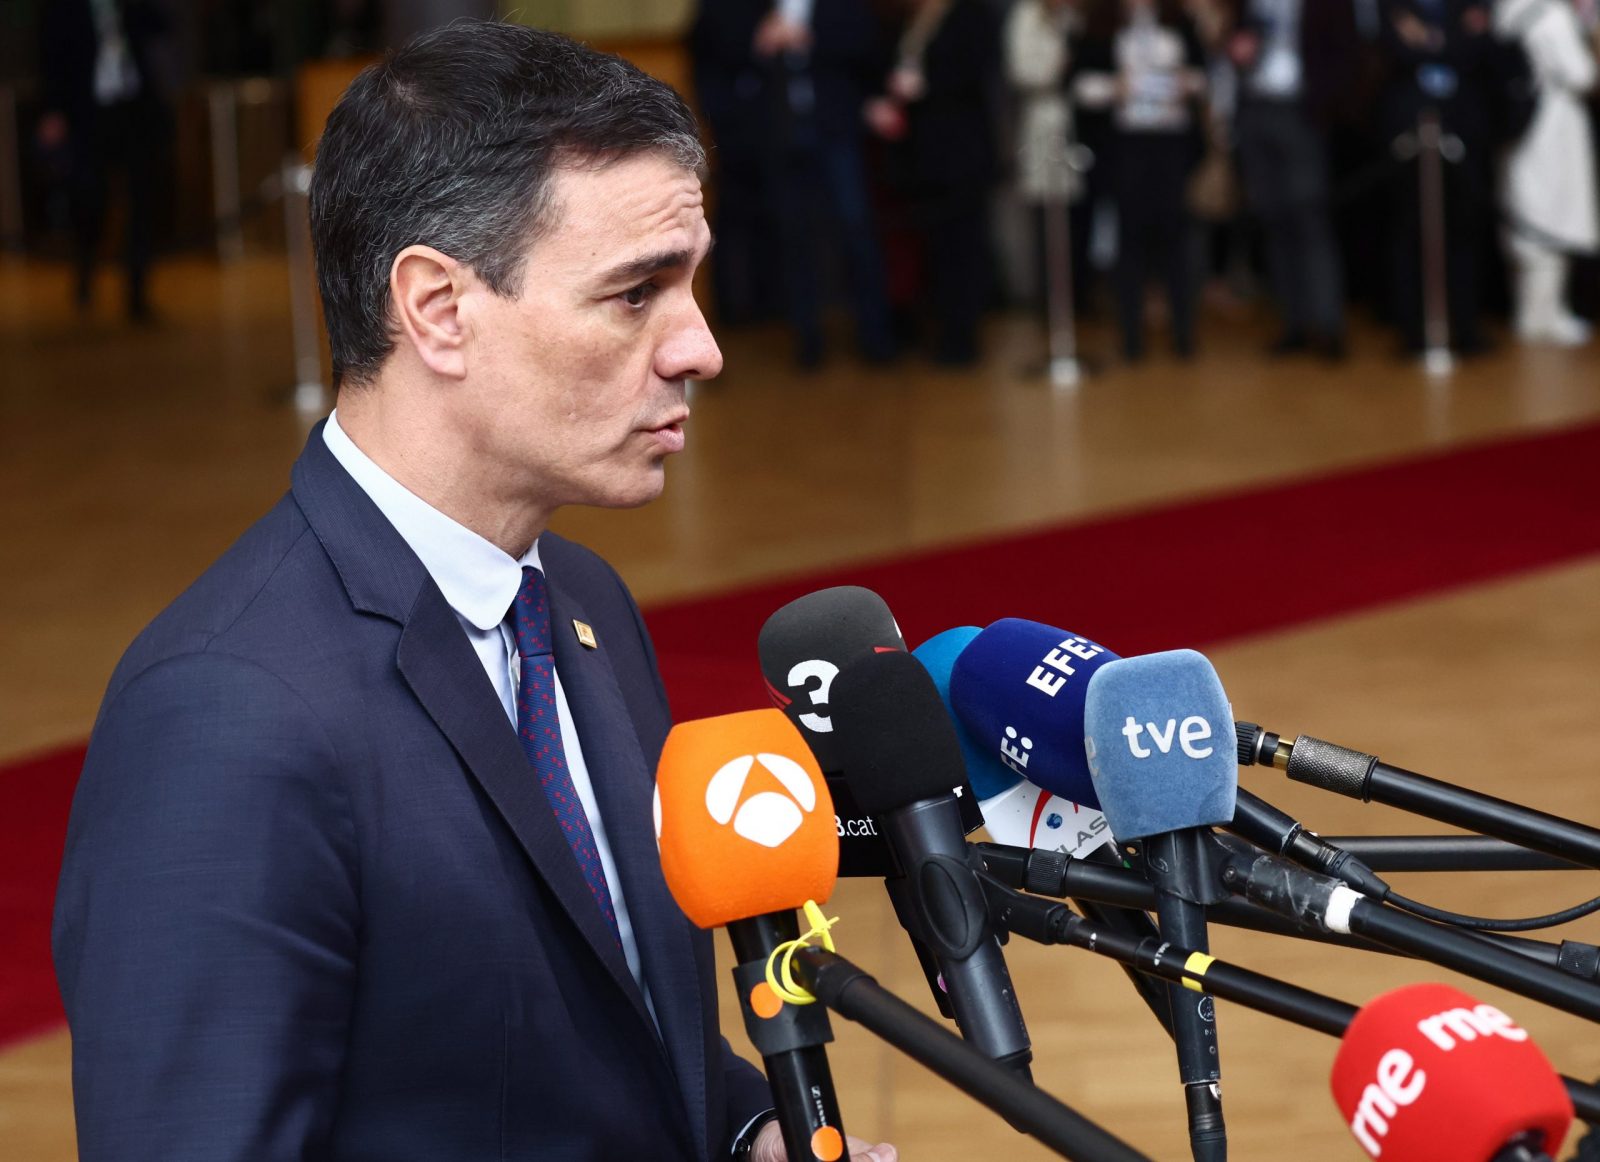 epa10538265 Spain's Prime Minister Pedro Sanchez speaks to the media as he arrives for a EU Summit in Brussels, Belgium, 23 March 2023. EU leaders will meet for a two-day summit in Brussels to discuss the latest developments in relation to 'Russia's war of aggression against Ukraine' and continued EU support for Ukraine and its people. The leaders will also debate on competitiveness, single market and the economy, energy, external relations among other topics, including migration.  EPA/STEPHANIE LECOCQ